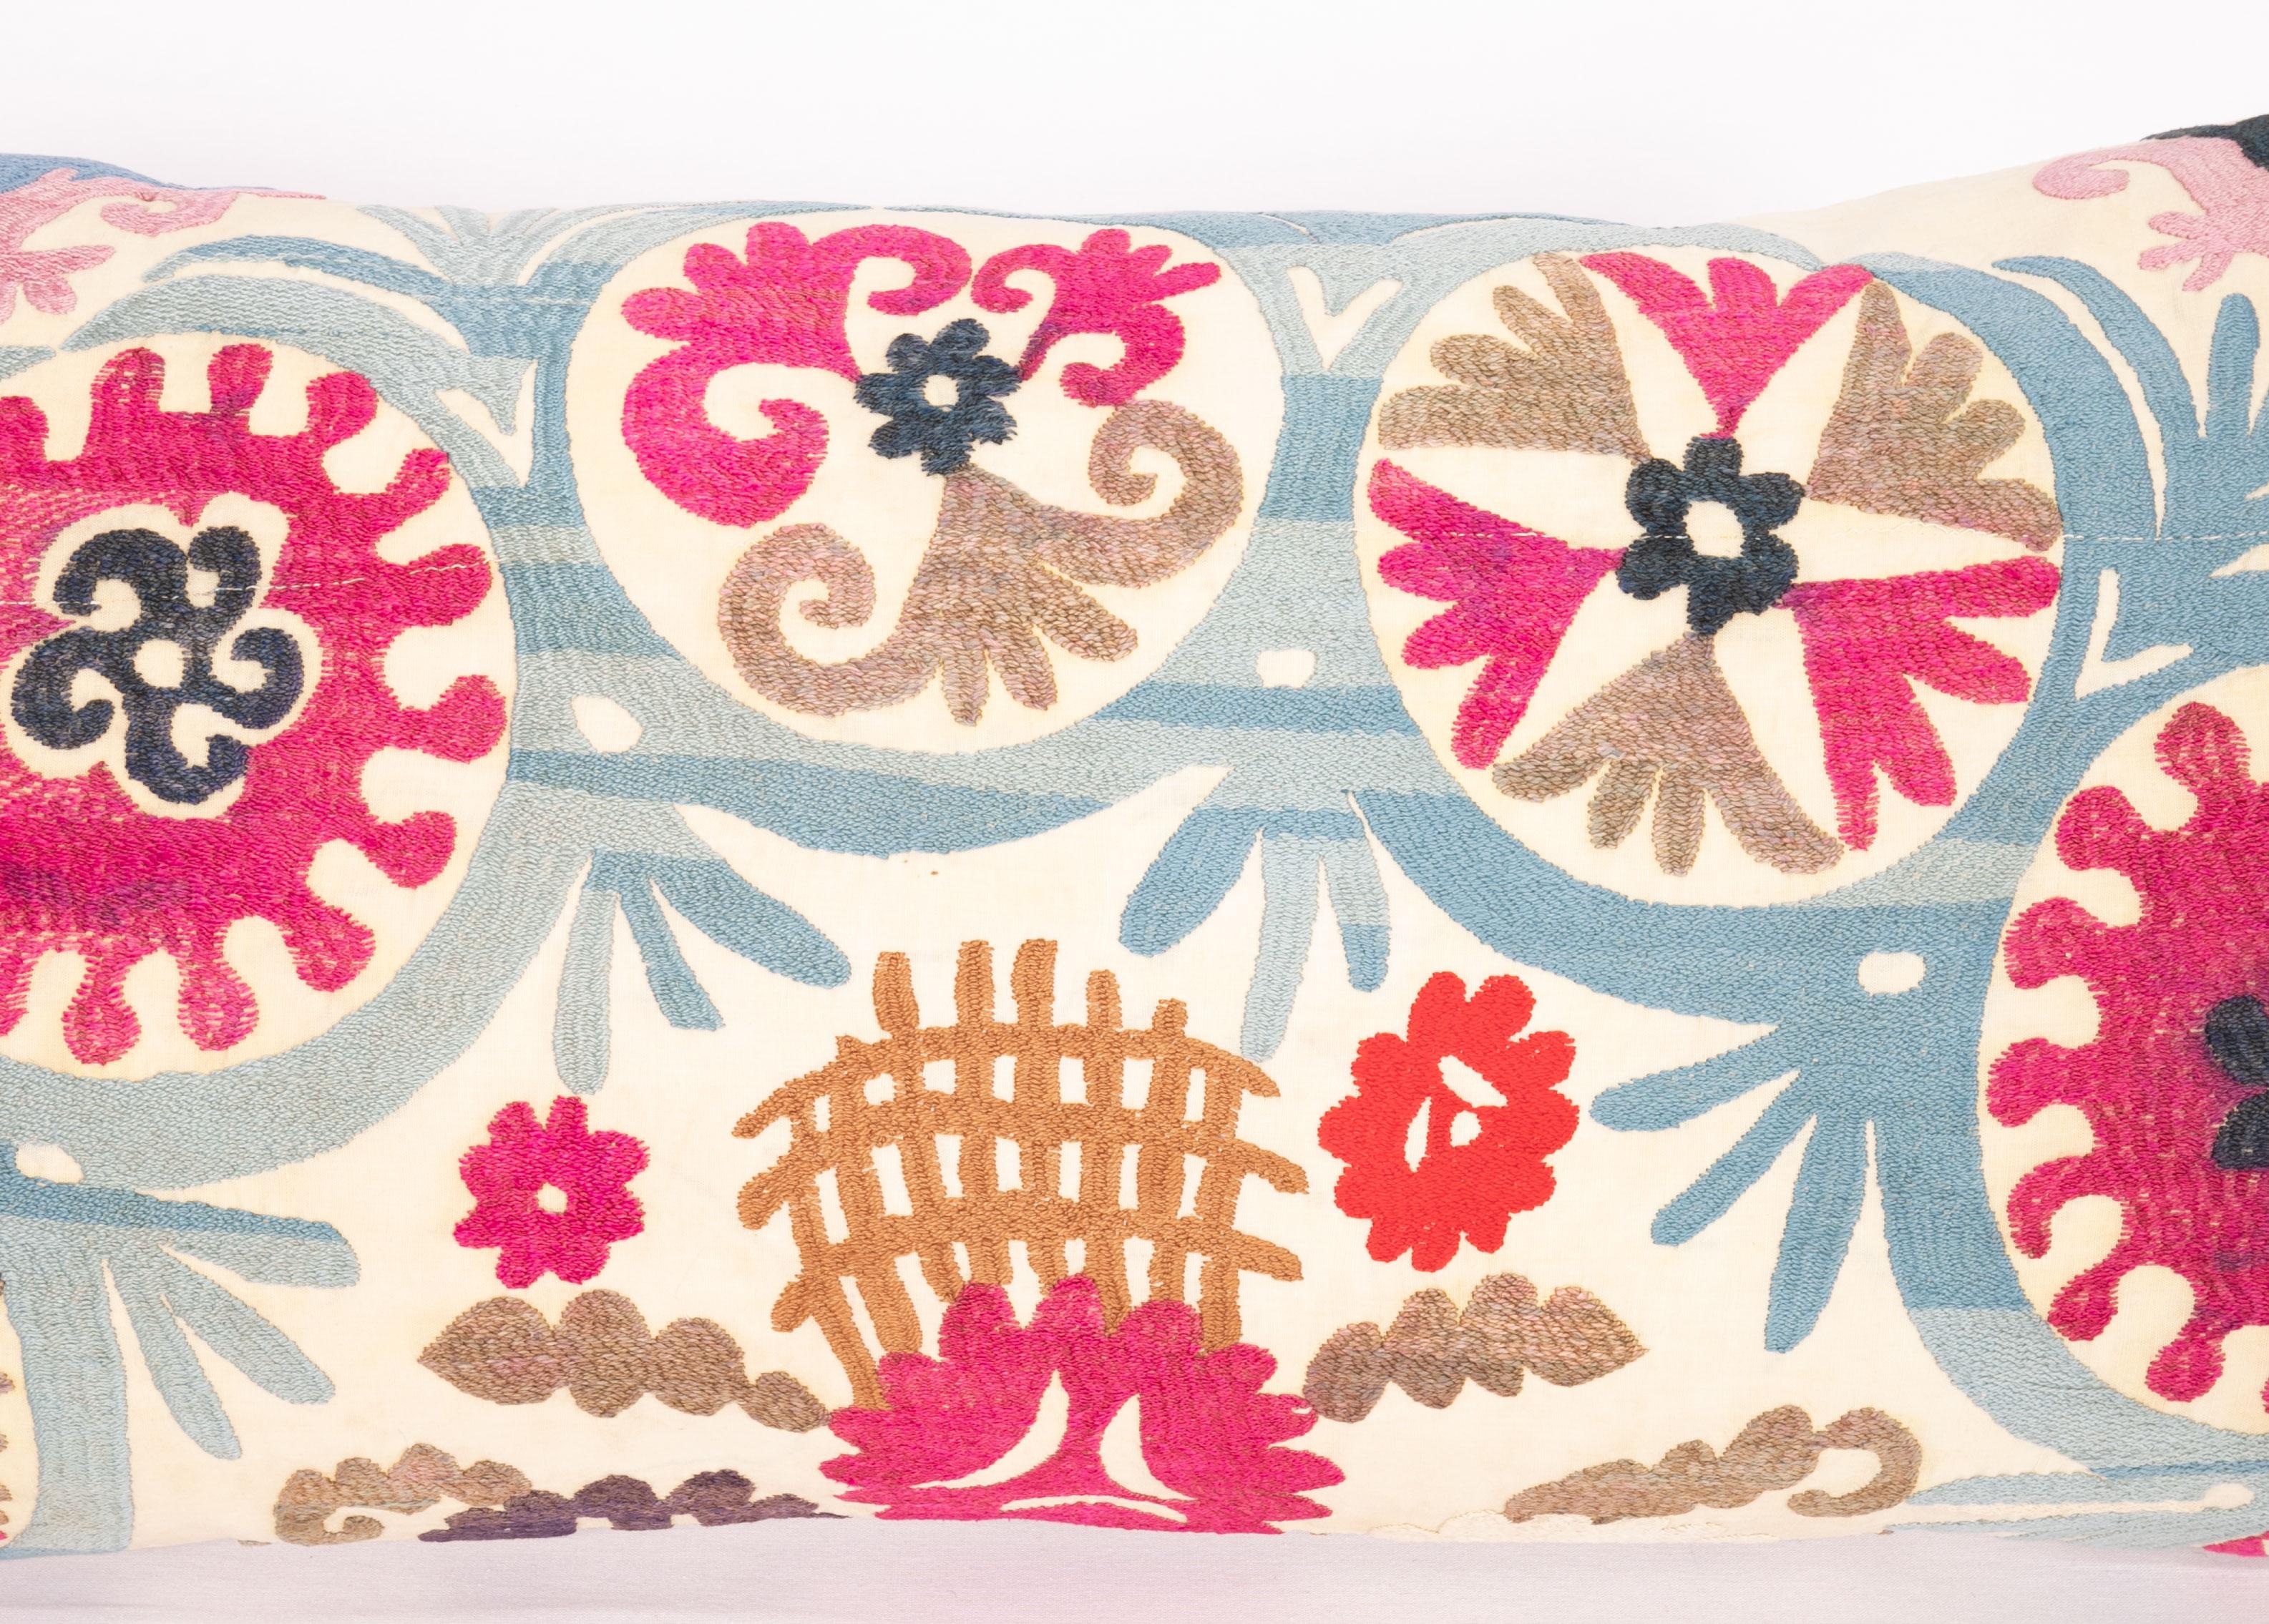 Suzani Lumbar Pillow Case Made from a Vintage Uzbek Suzani, Mid-20th Century In Good Condition For Sale In Istanbul, TR